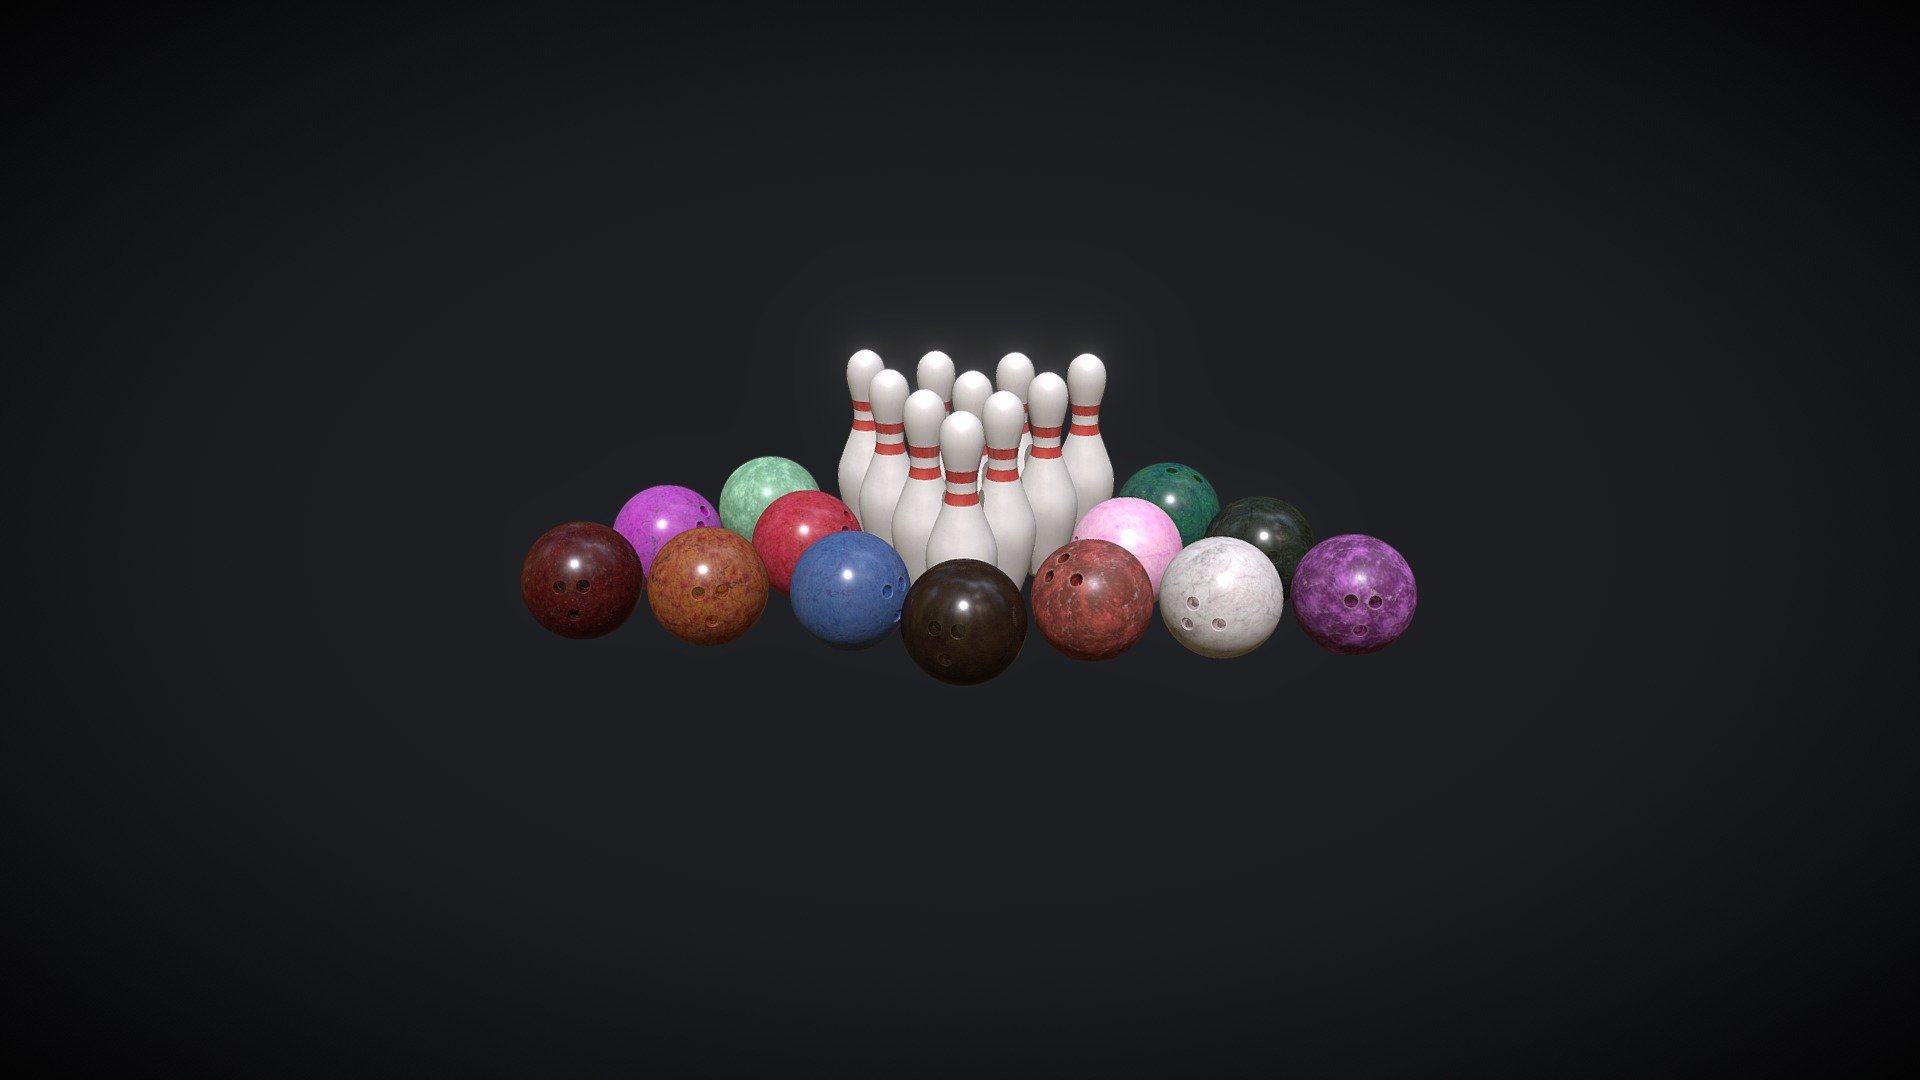 Contains 13 bowling balls with different designs and colors.
Bowling is a target sport and recreational activity in which a player rolls a ball toward pins or another target 3d model